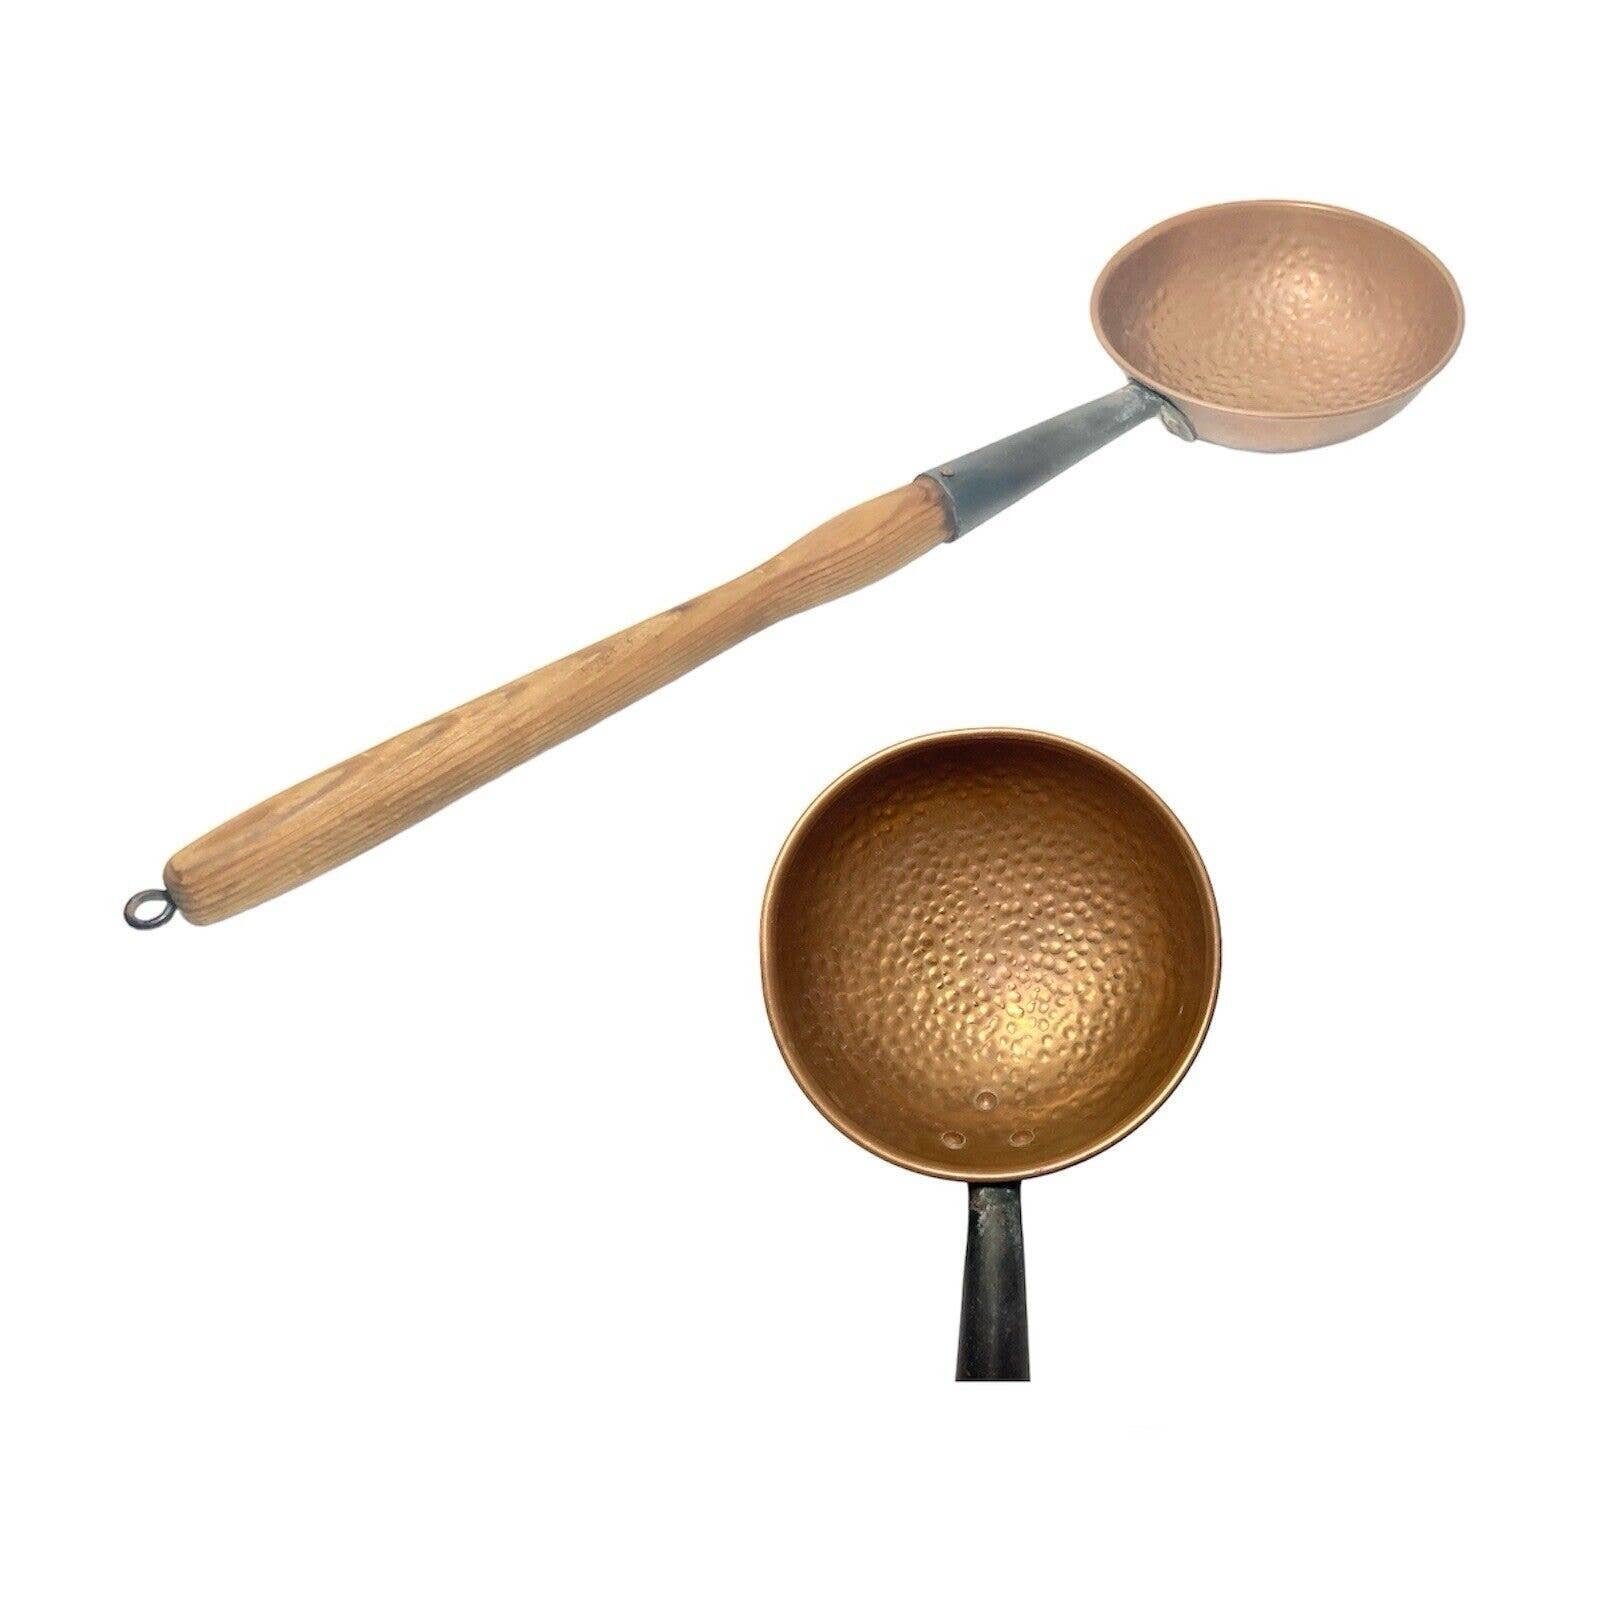 Mid-century 1950-60s Large Solid Hammered Copper Pot Ladle w/Wooden Handle 20.5” 6yWdO8xG9